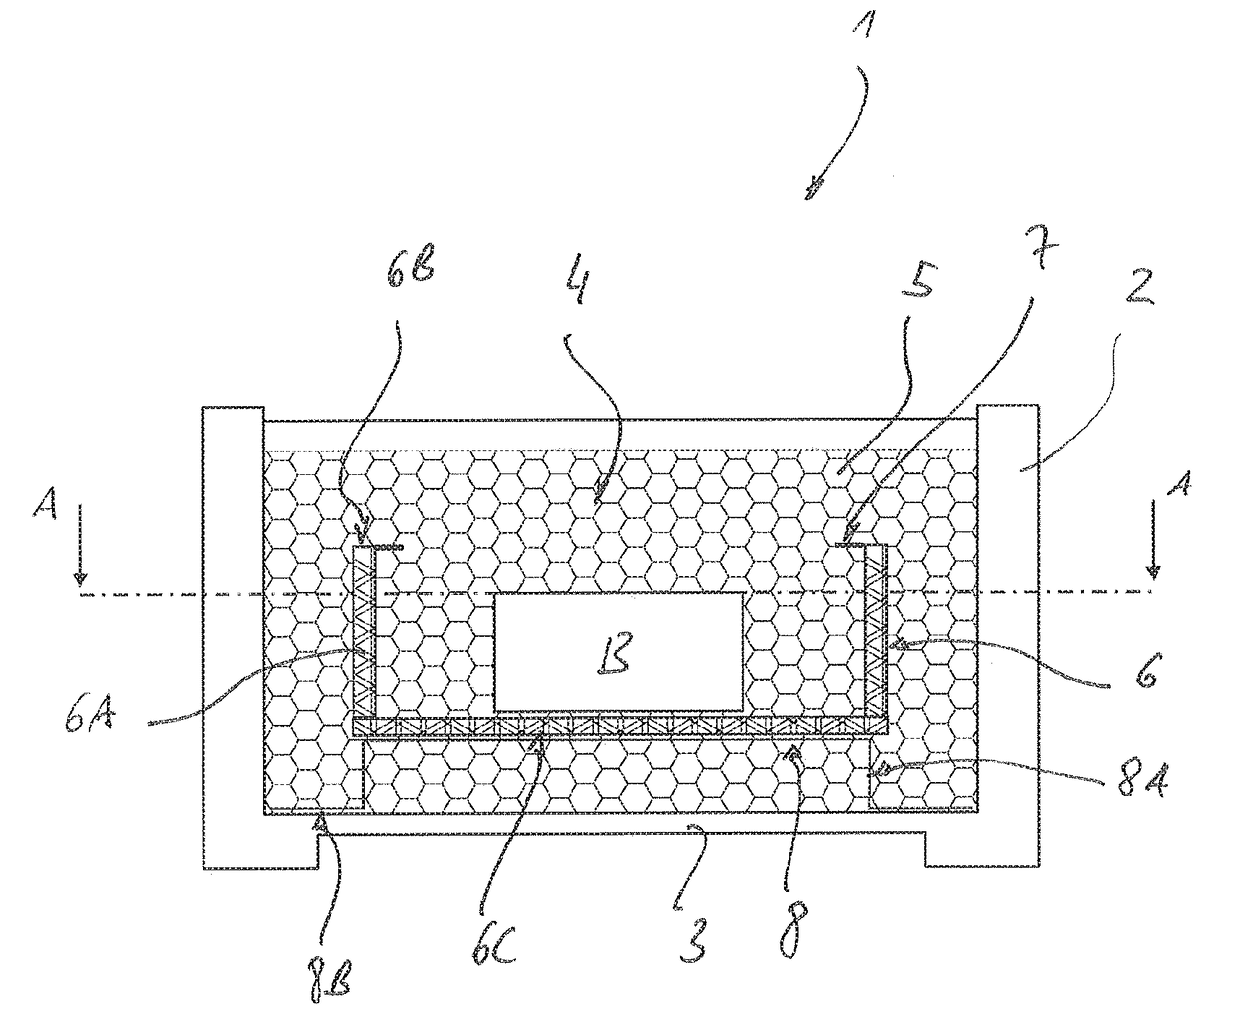 Apparatus and method for transporting electrochemical cells